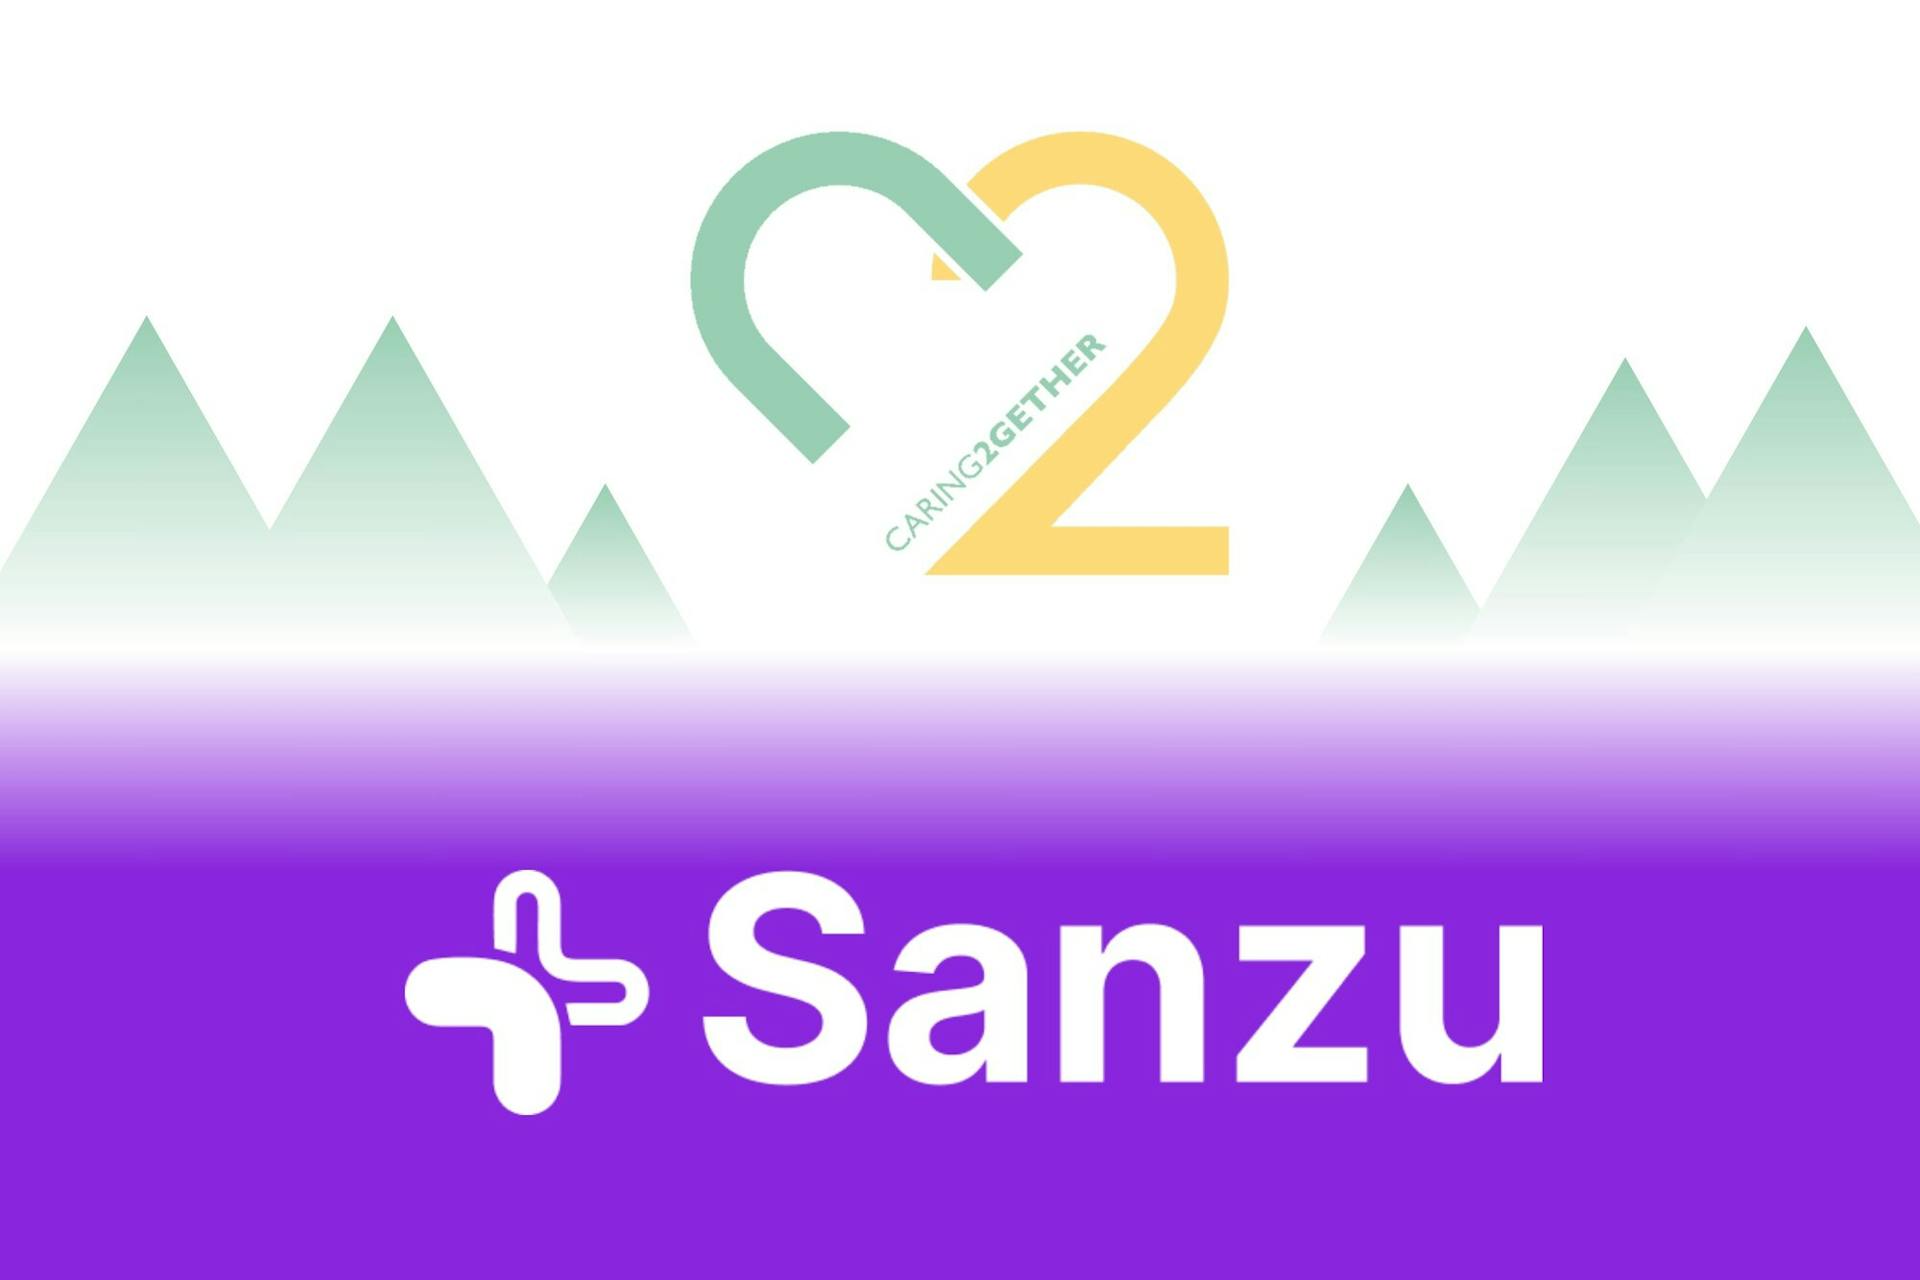 Introduction: C2 and Sanzu Forging a Path in Mental Health Together